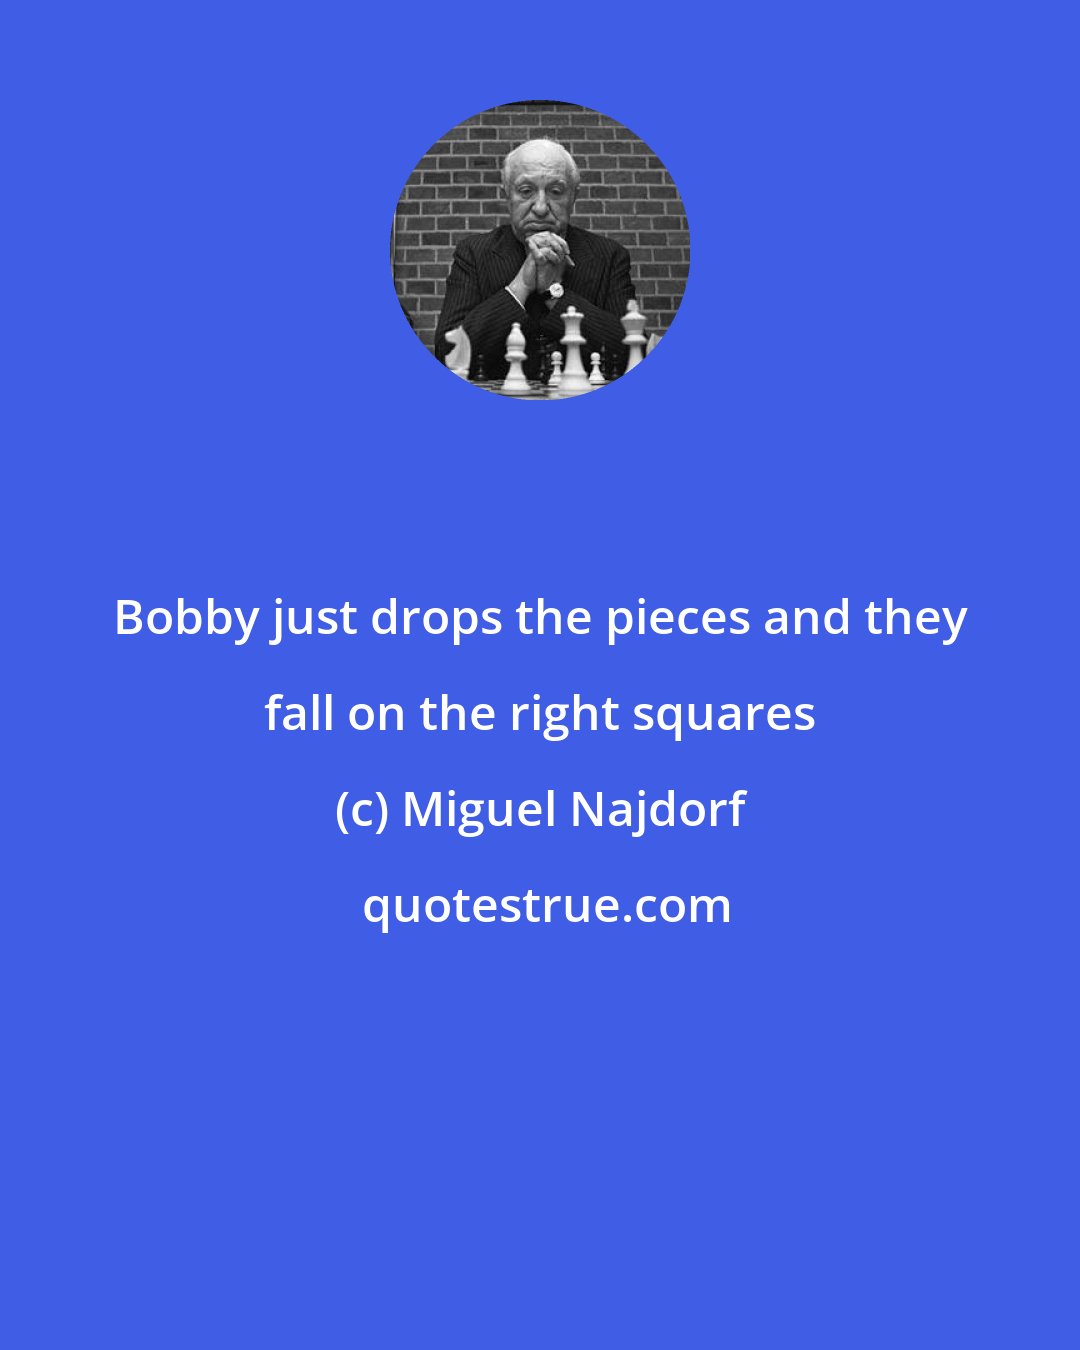 Miguel Najdorf: Bobby just drops the pieces and they fall on the right squares